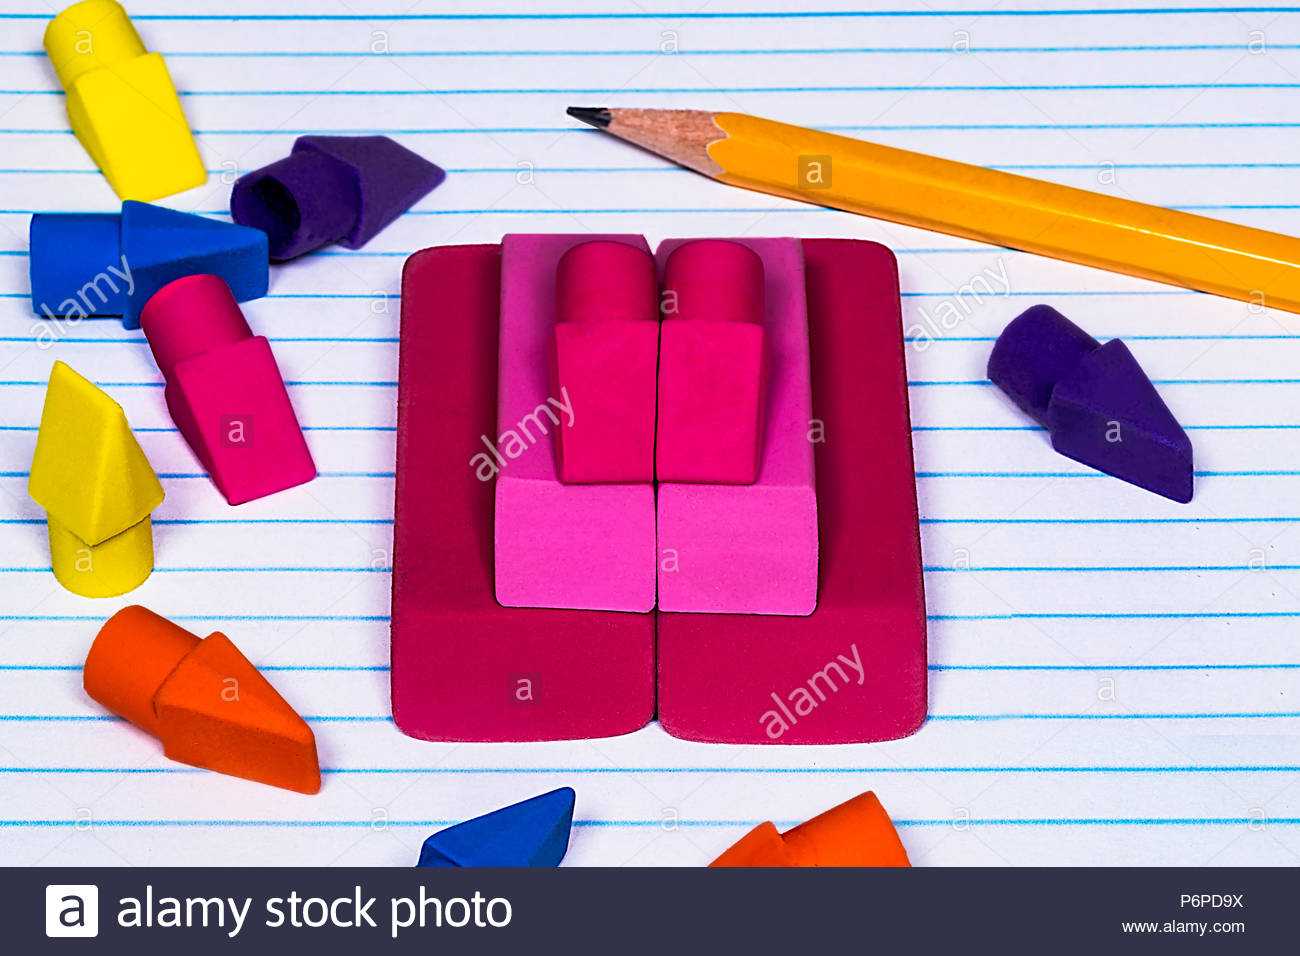 College Ruled Paper Stock Photos & College Ruled Paper Stock Throughout College Ruled Lined Paper Template Word 2007